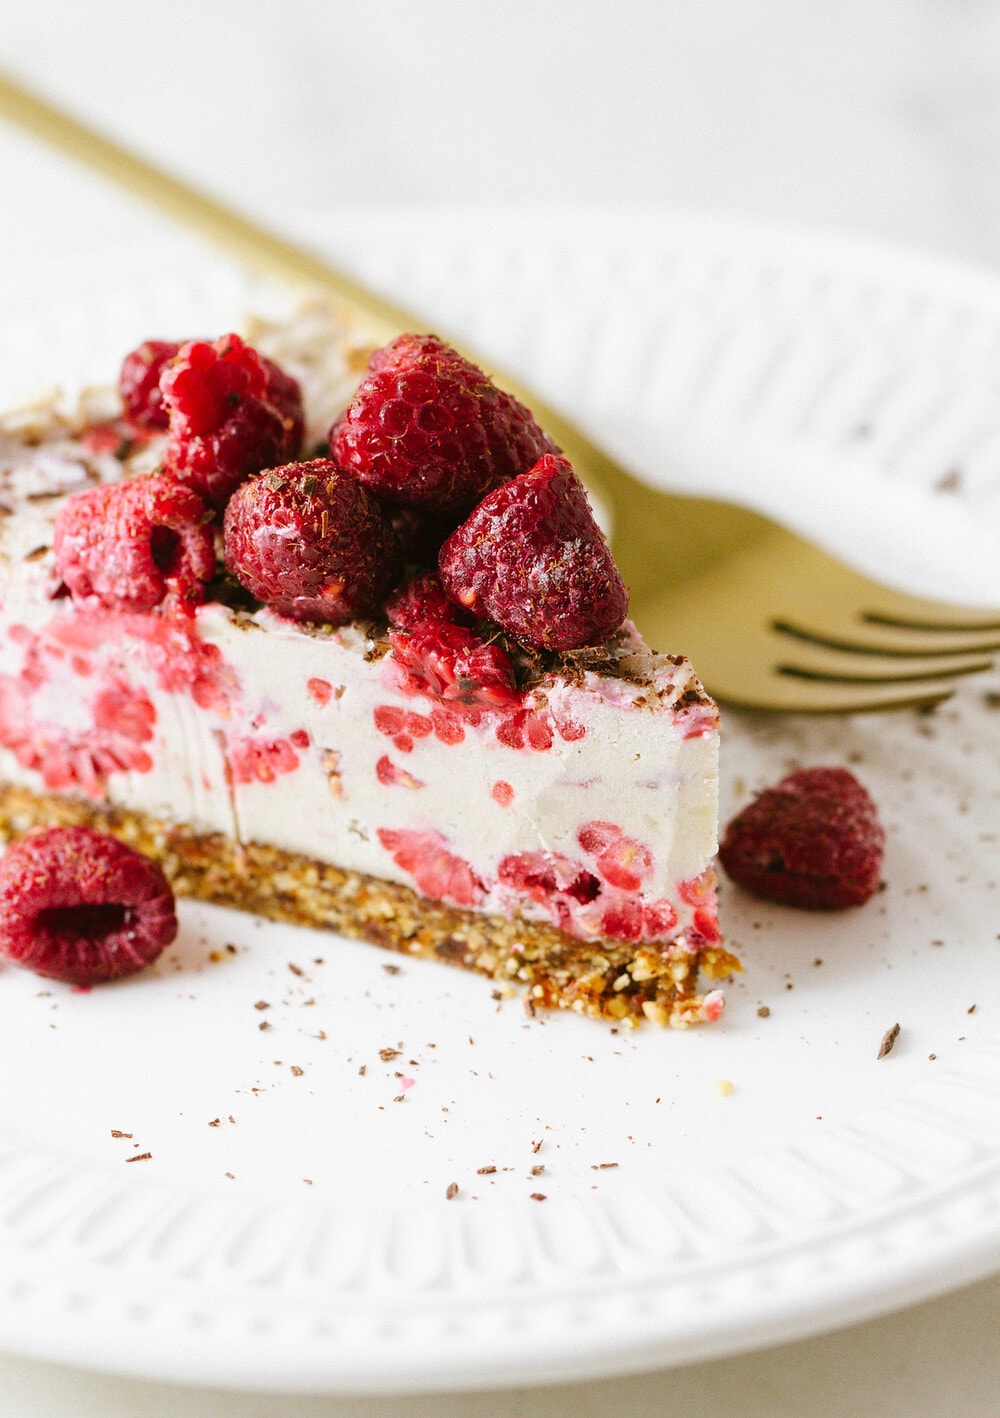 side angle view of a slice of vegan no bake raspberry vanilla cheesecake on a white plate with gold fork.